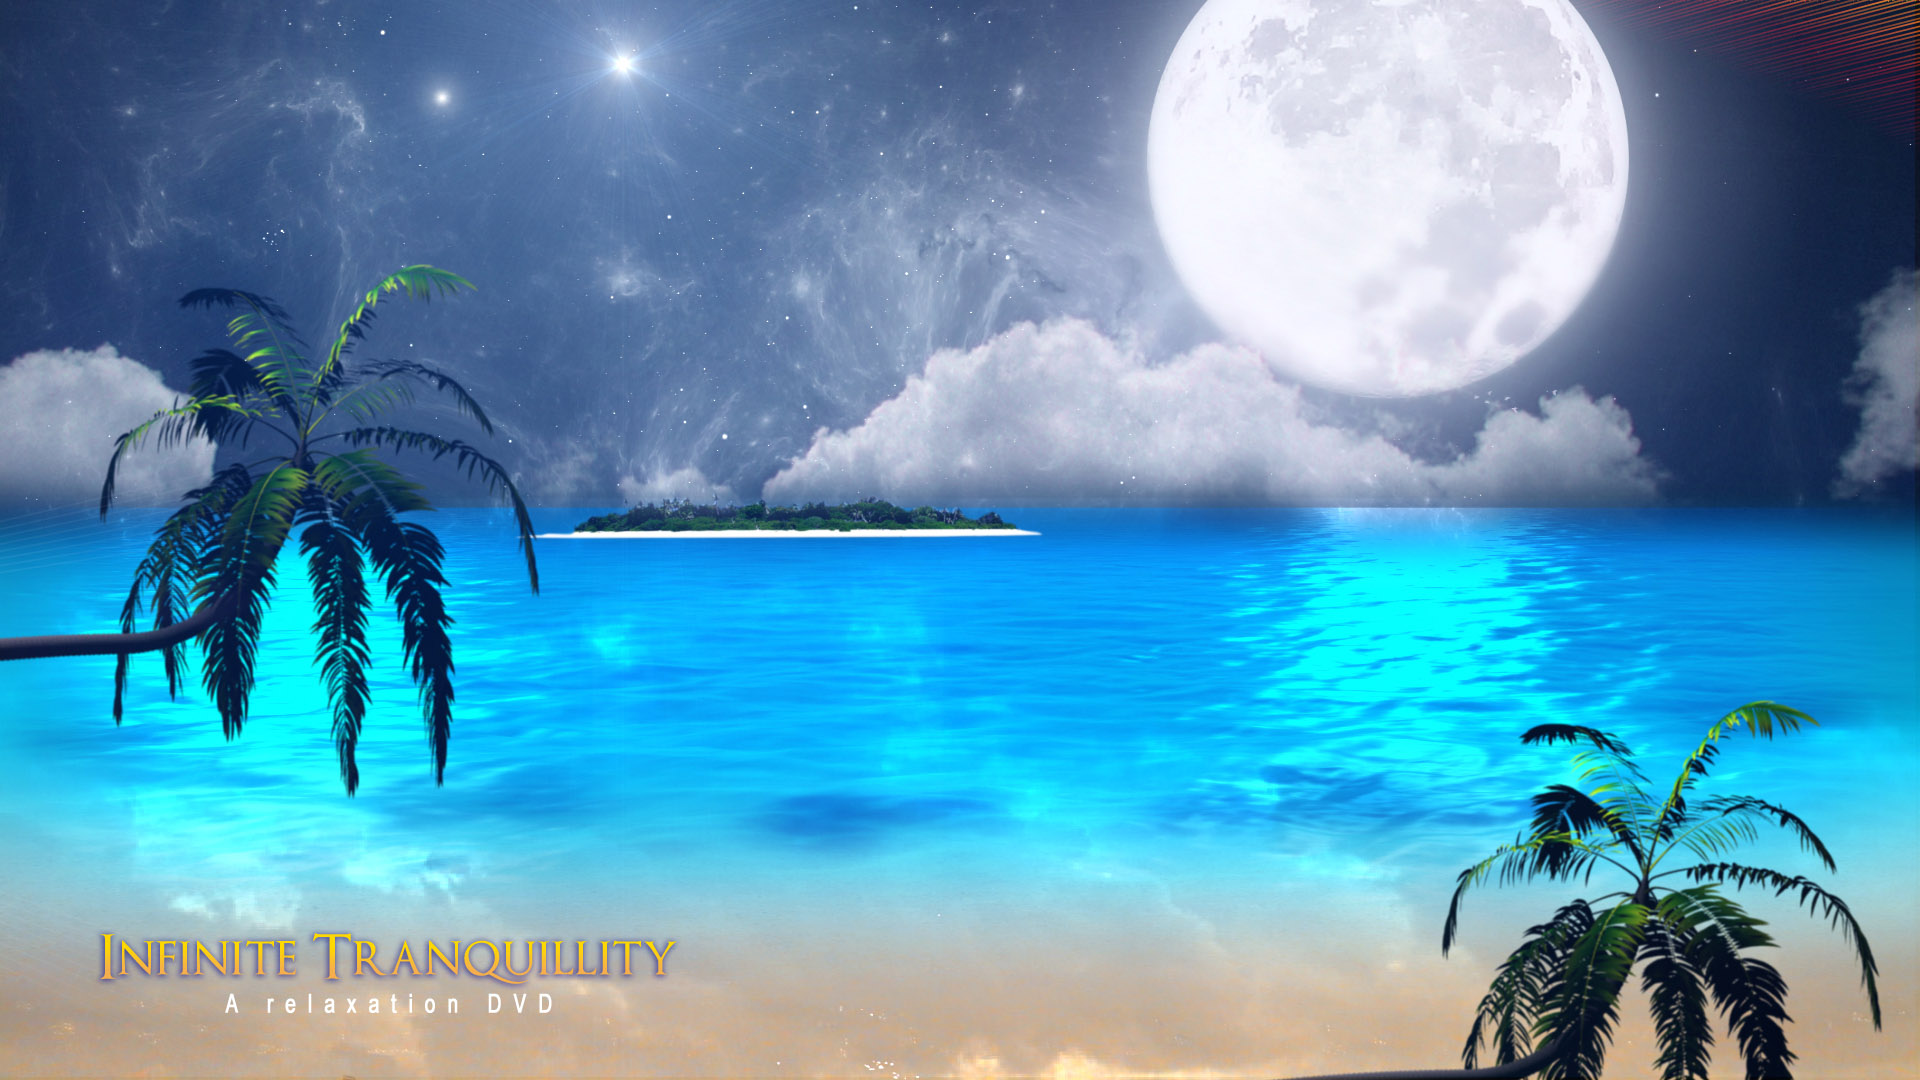 Wallpaper peaceful resting relaxing images for desktop section пейзажи   download